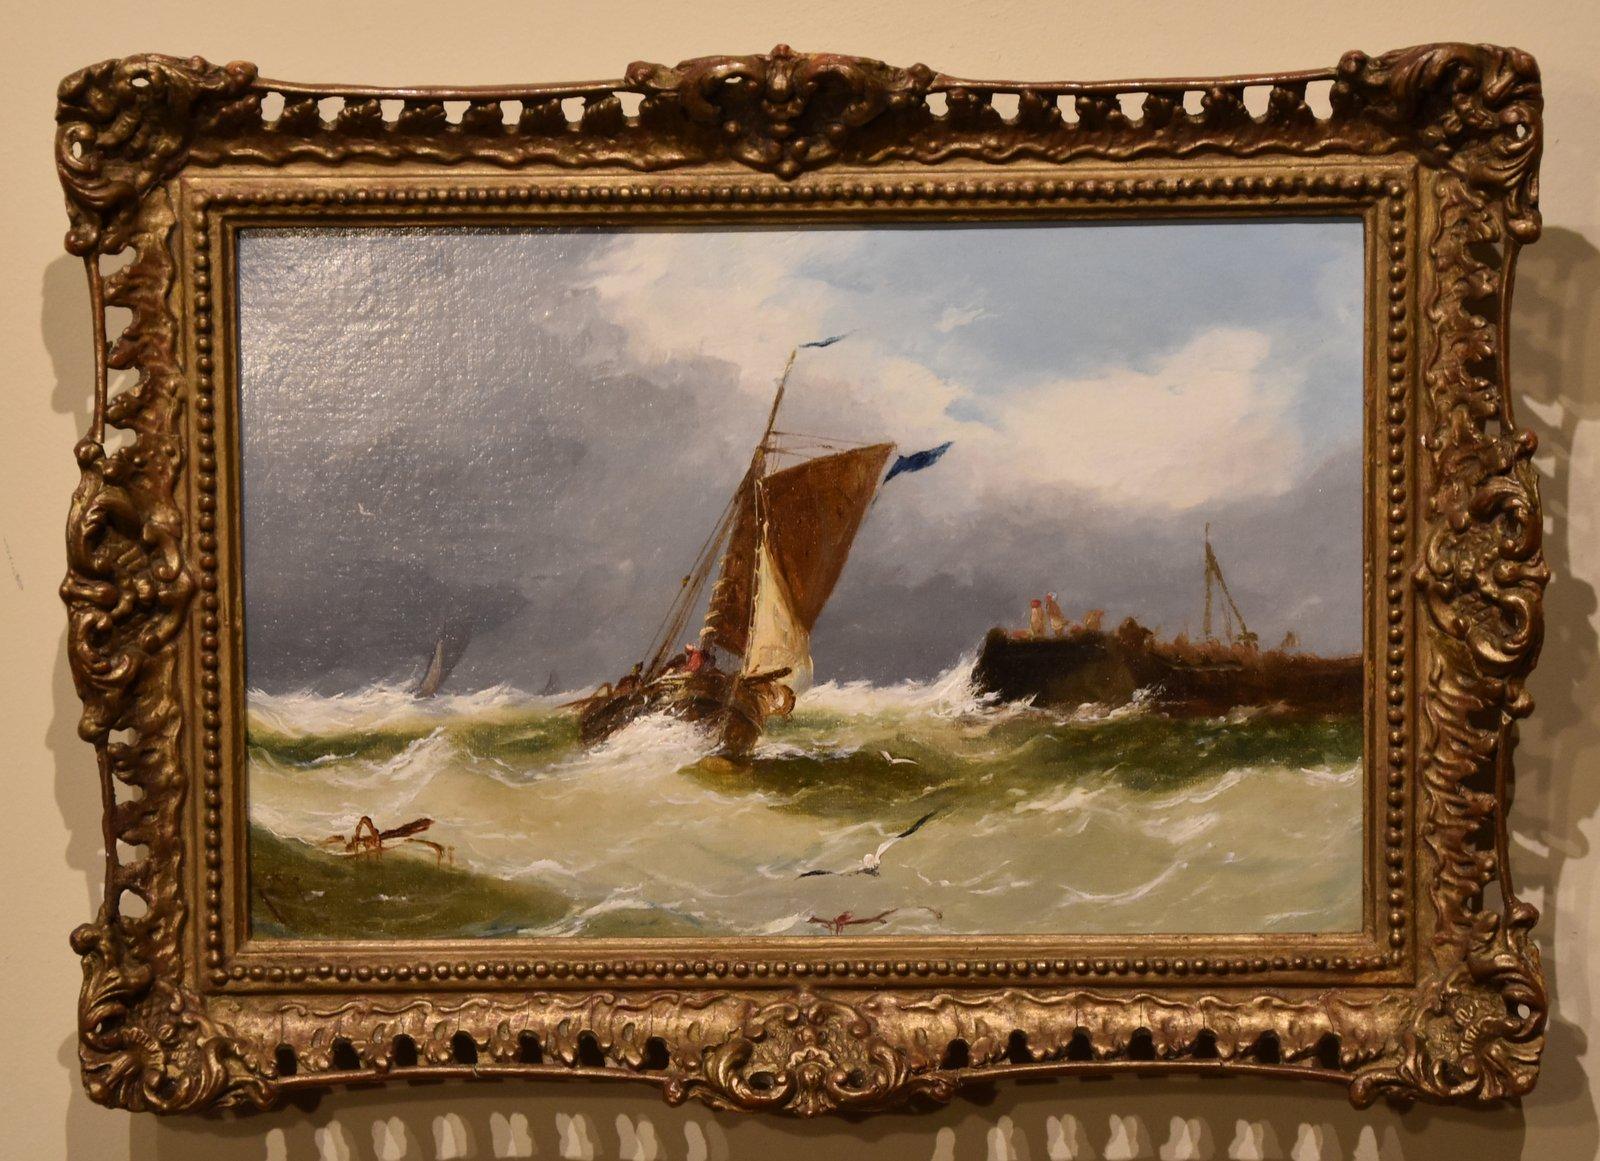 Oil Painting attributed John Callow "A Blustery day off the Coast" Oil on canvas signed with initials.

Dimensions unframed 8 x 12 inches
Dimensions framed 10.5 x 14 inches

All of the items that we advertise for sale have been as accurately